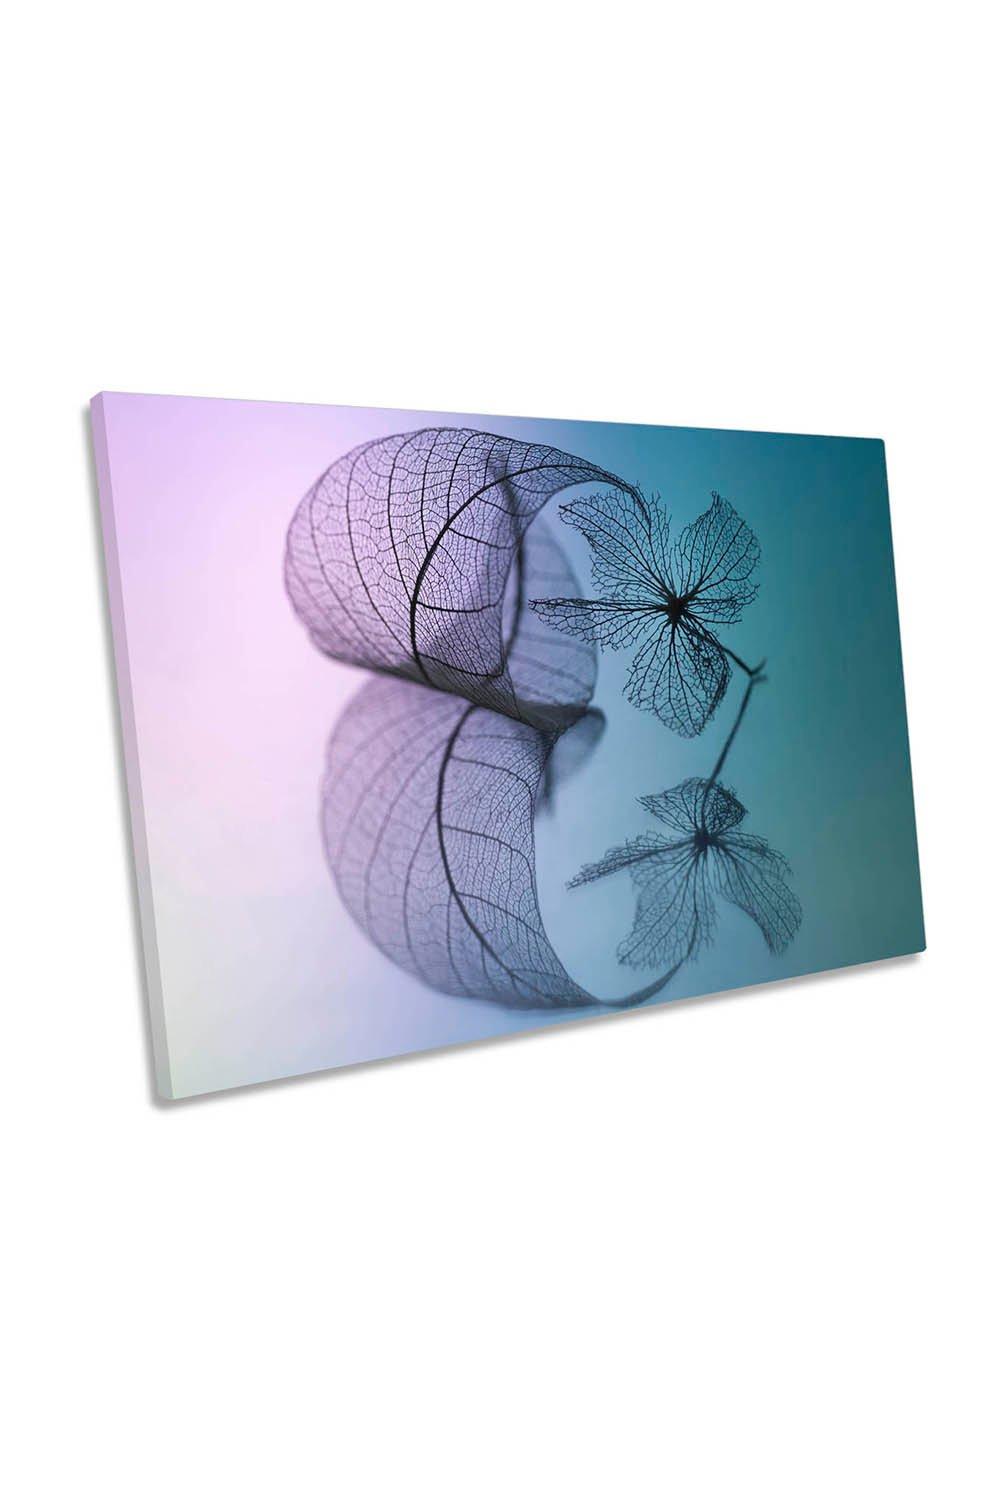 Story of Leaf and Flower Canvas Wall Art Picture Print